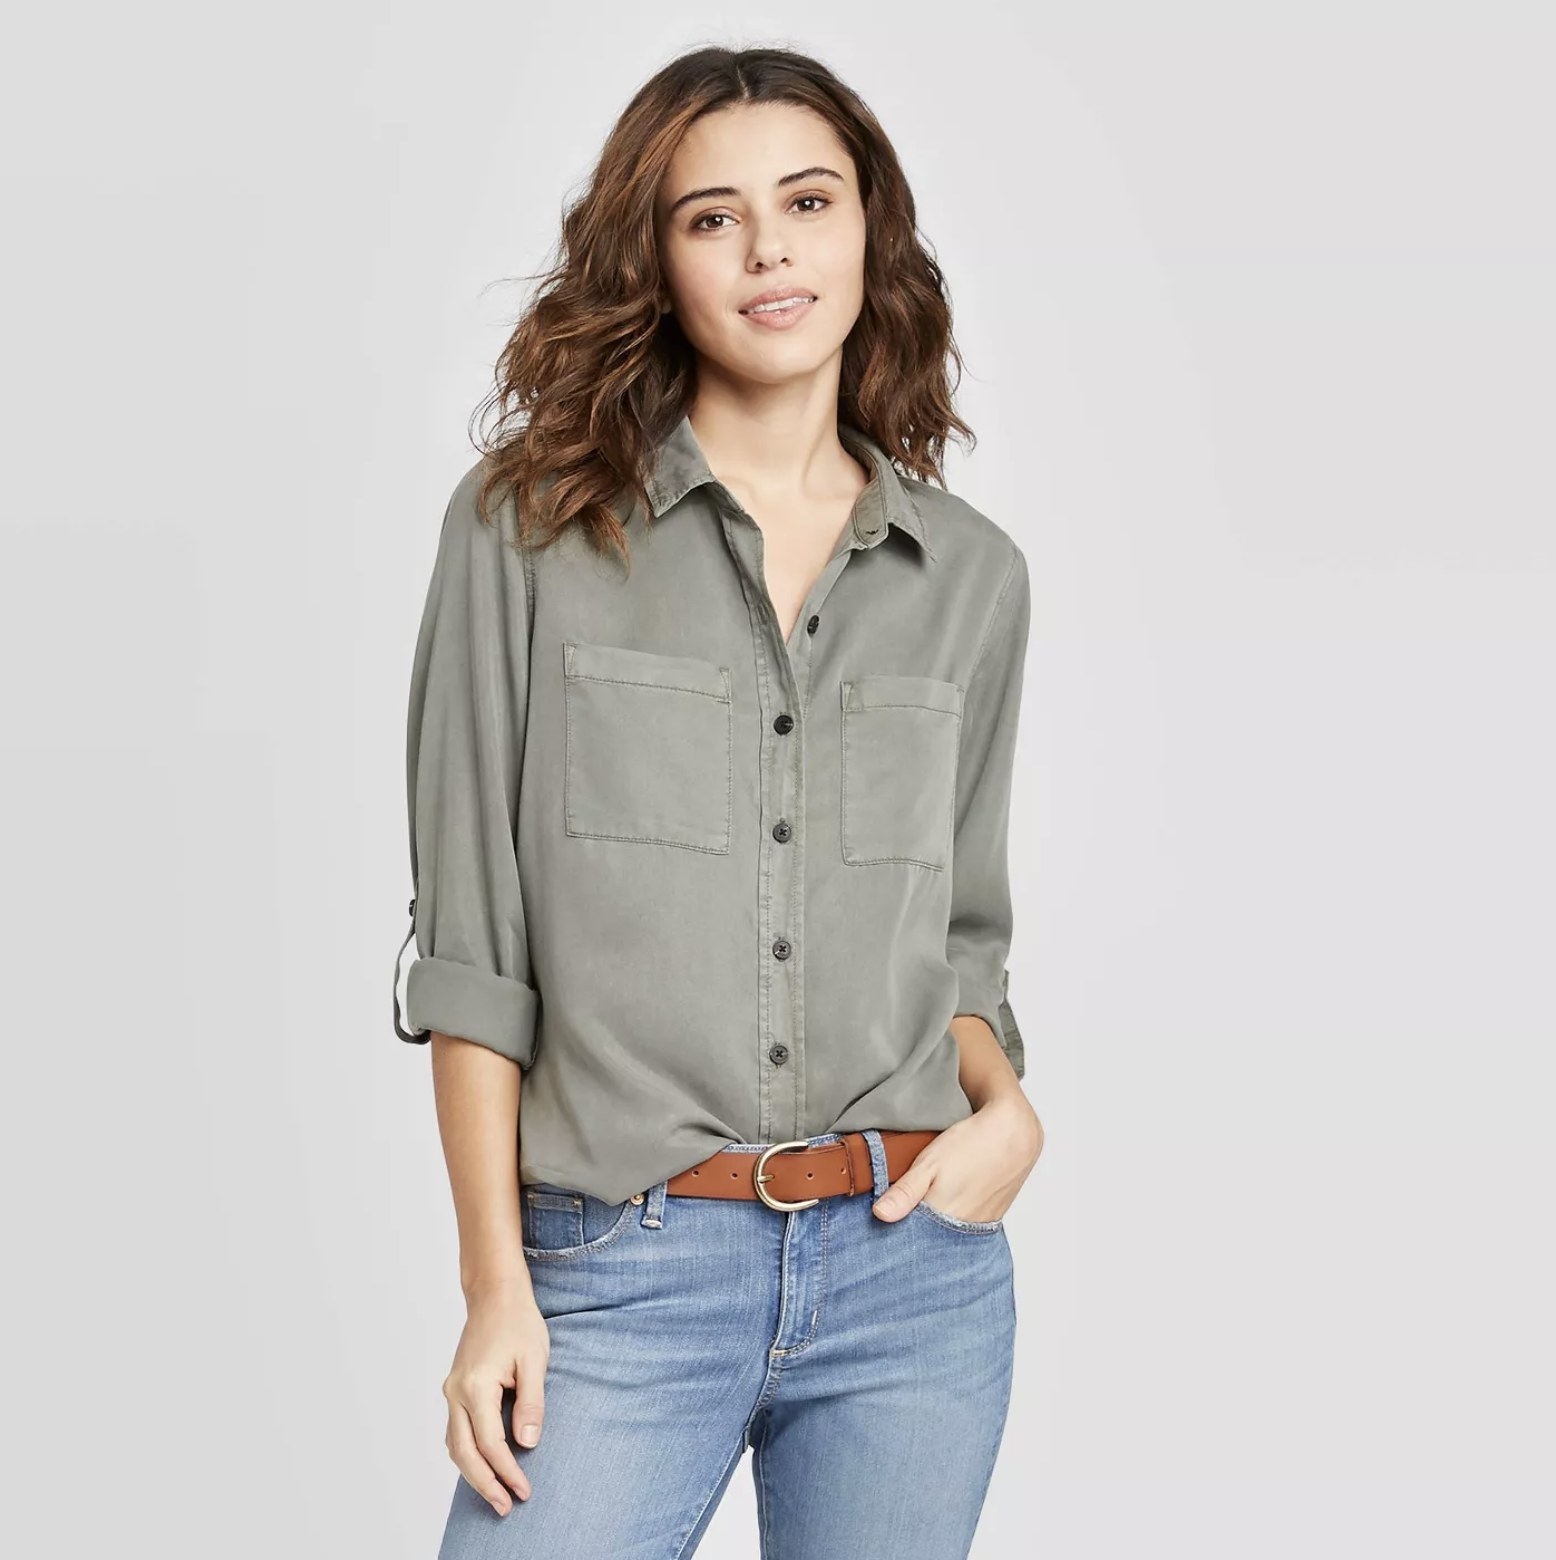 Model wears gray long-sleeve button-down shirt with light blue jeans